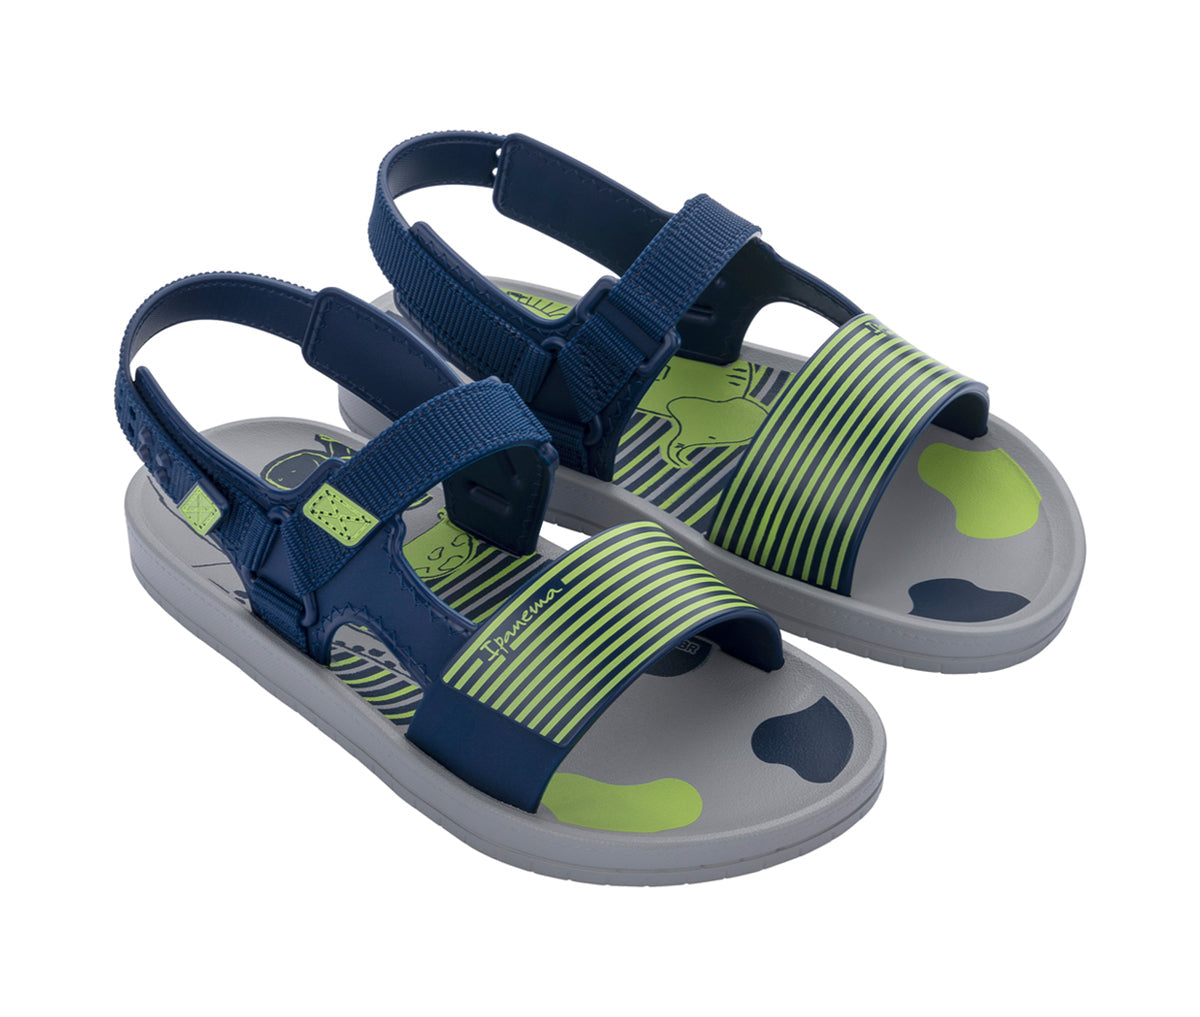 Angled view of a pair of grey, blue and neon green Ipanema Recreio Papate kids Sandals.